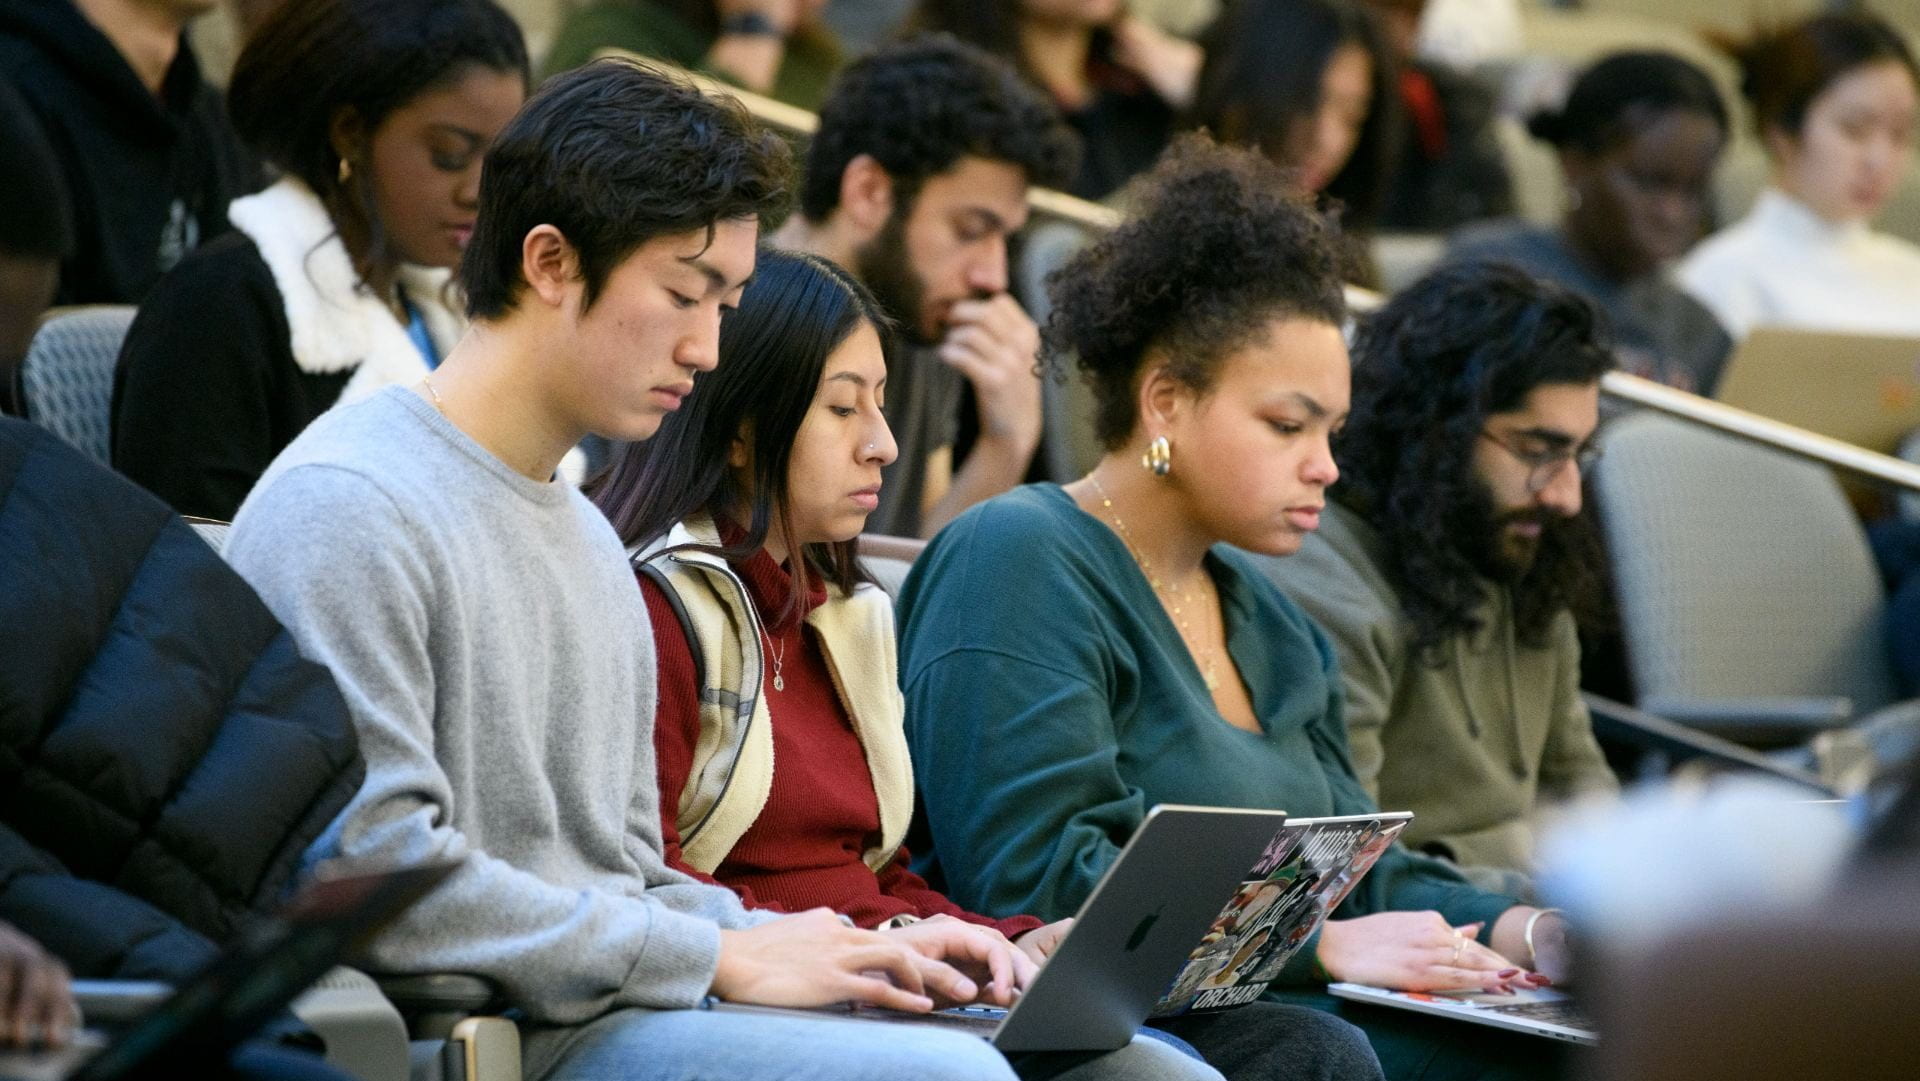 Students look down at their laptops in a lecture hall.